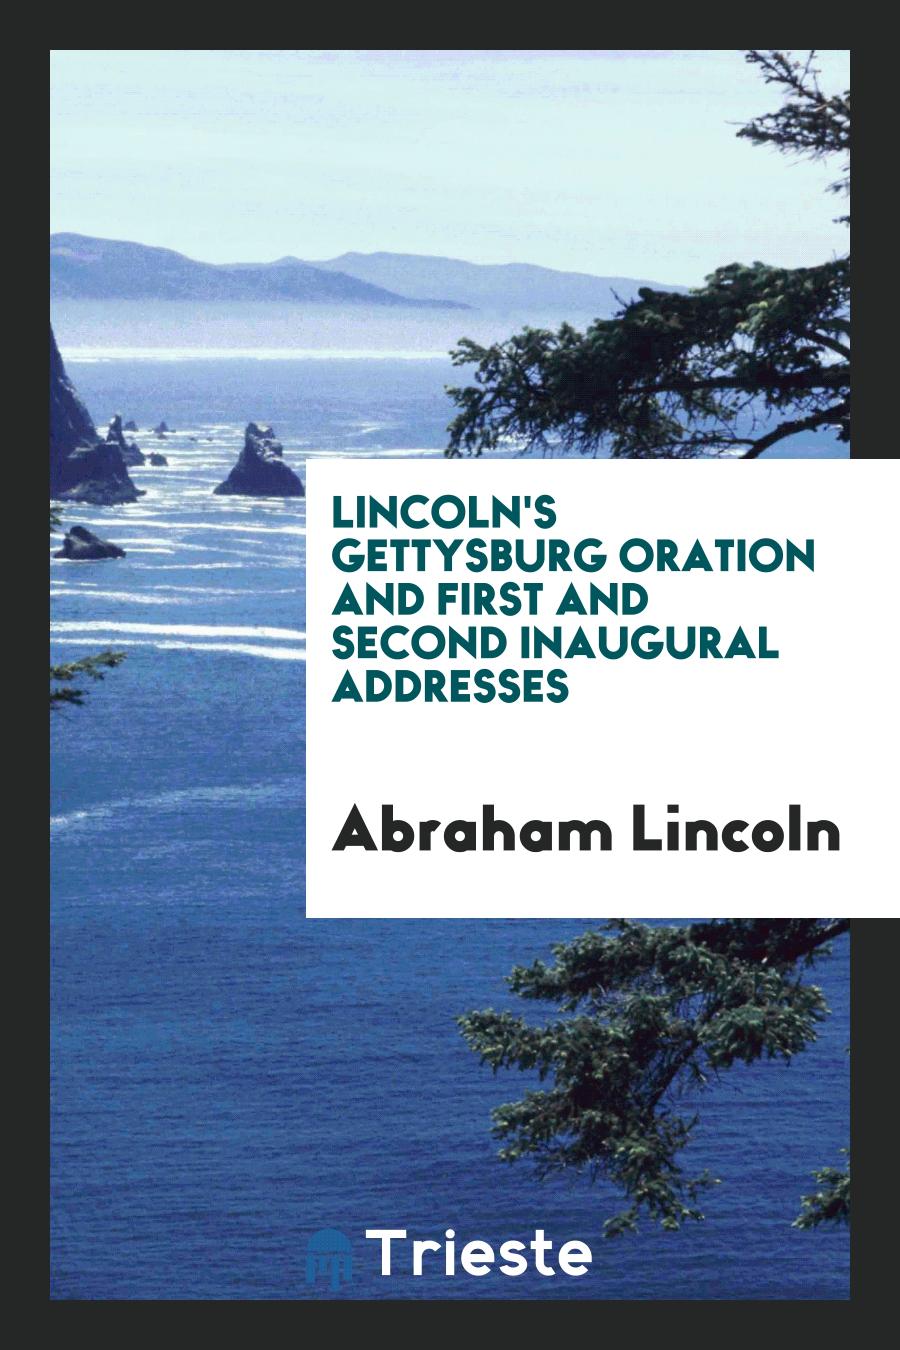 Lincoln's Gettysburg Oration and First and Second Inaugural Addresses